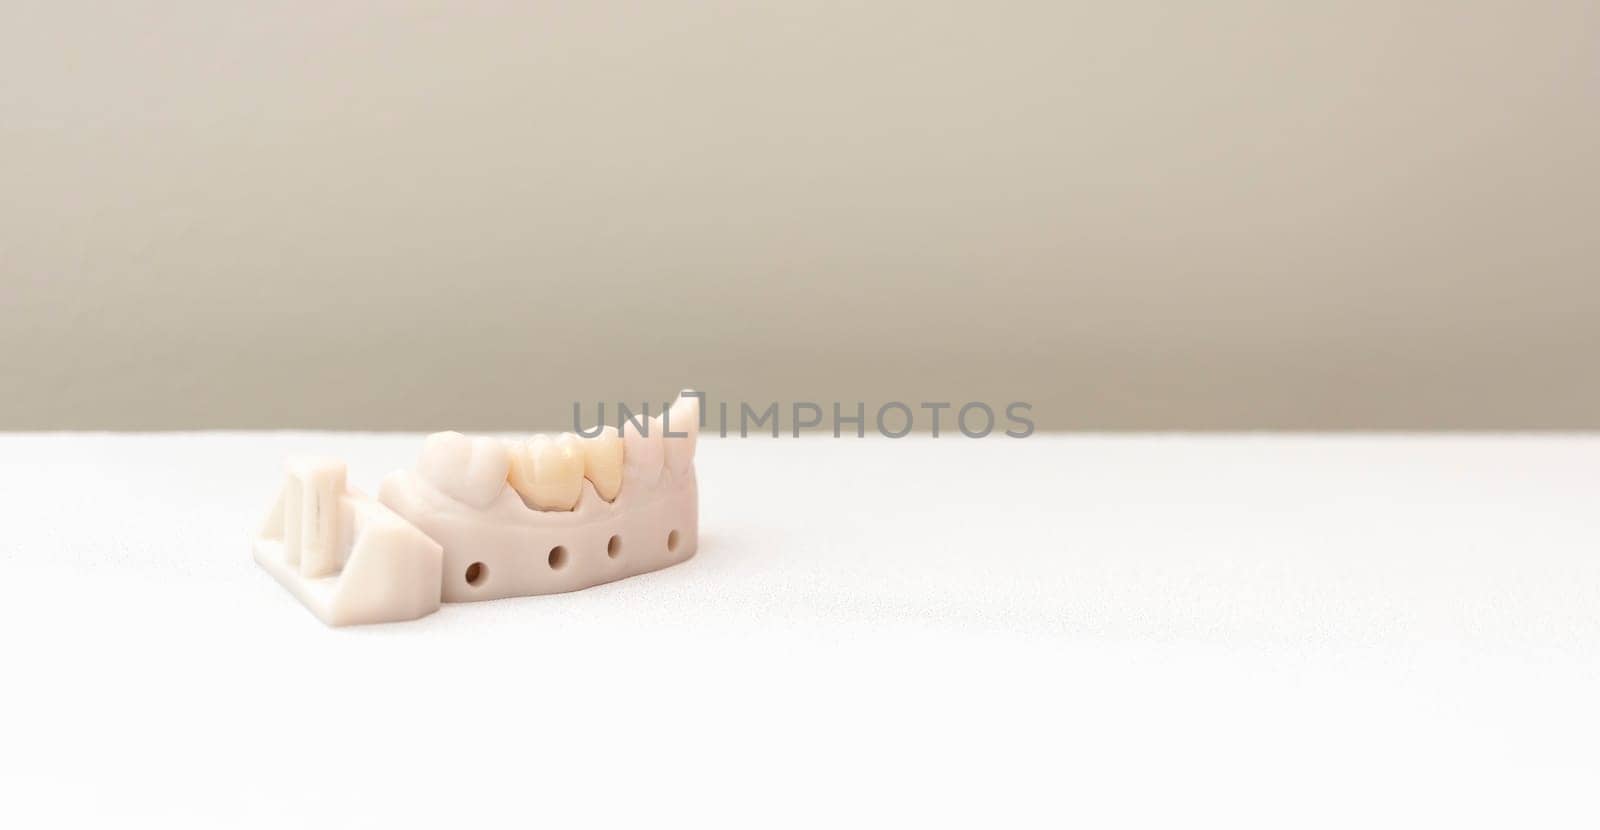 Banner Tooth Crown or Dental Cap in Box, Implant Model Tooth Support On White Table. Copy Space for Text. Crown Delivery. Bridge Placement. Horizontal Plane by netatsi